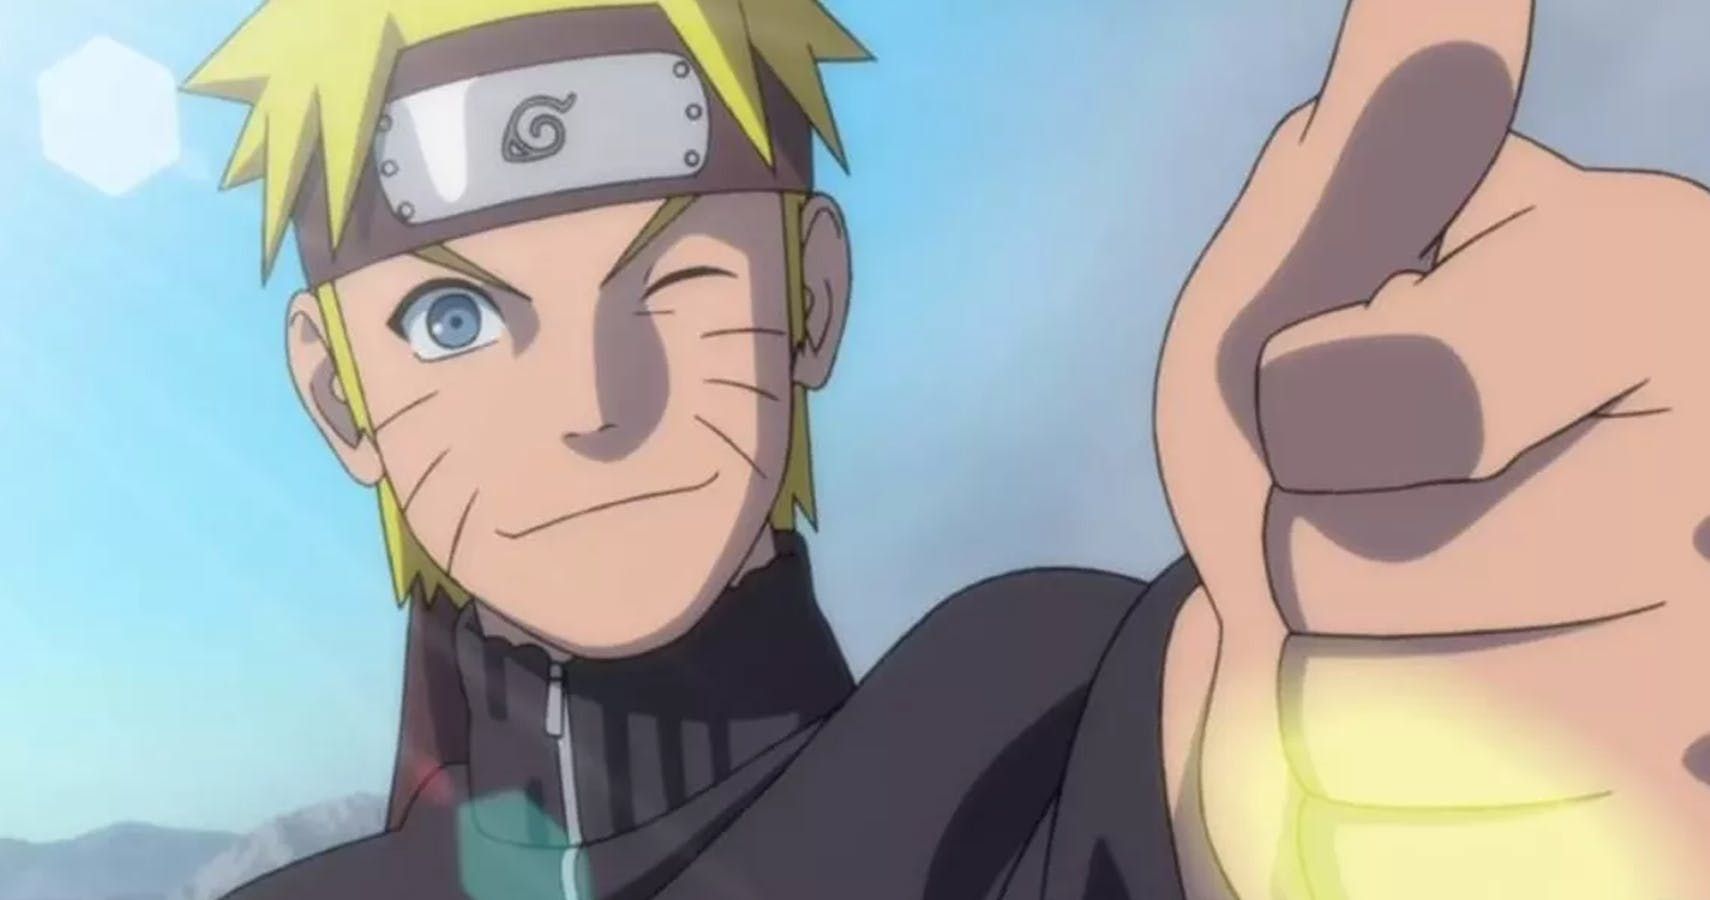 Myers-Briggs Personality Types Of Naruto Characters | CBR
